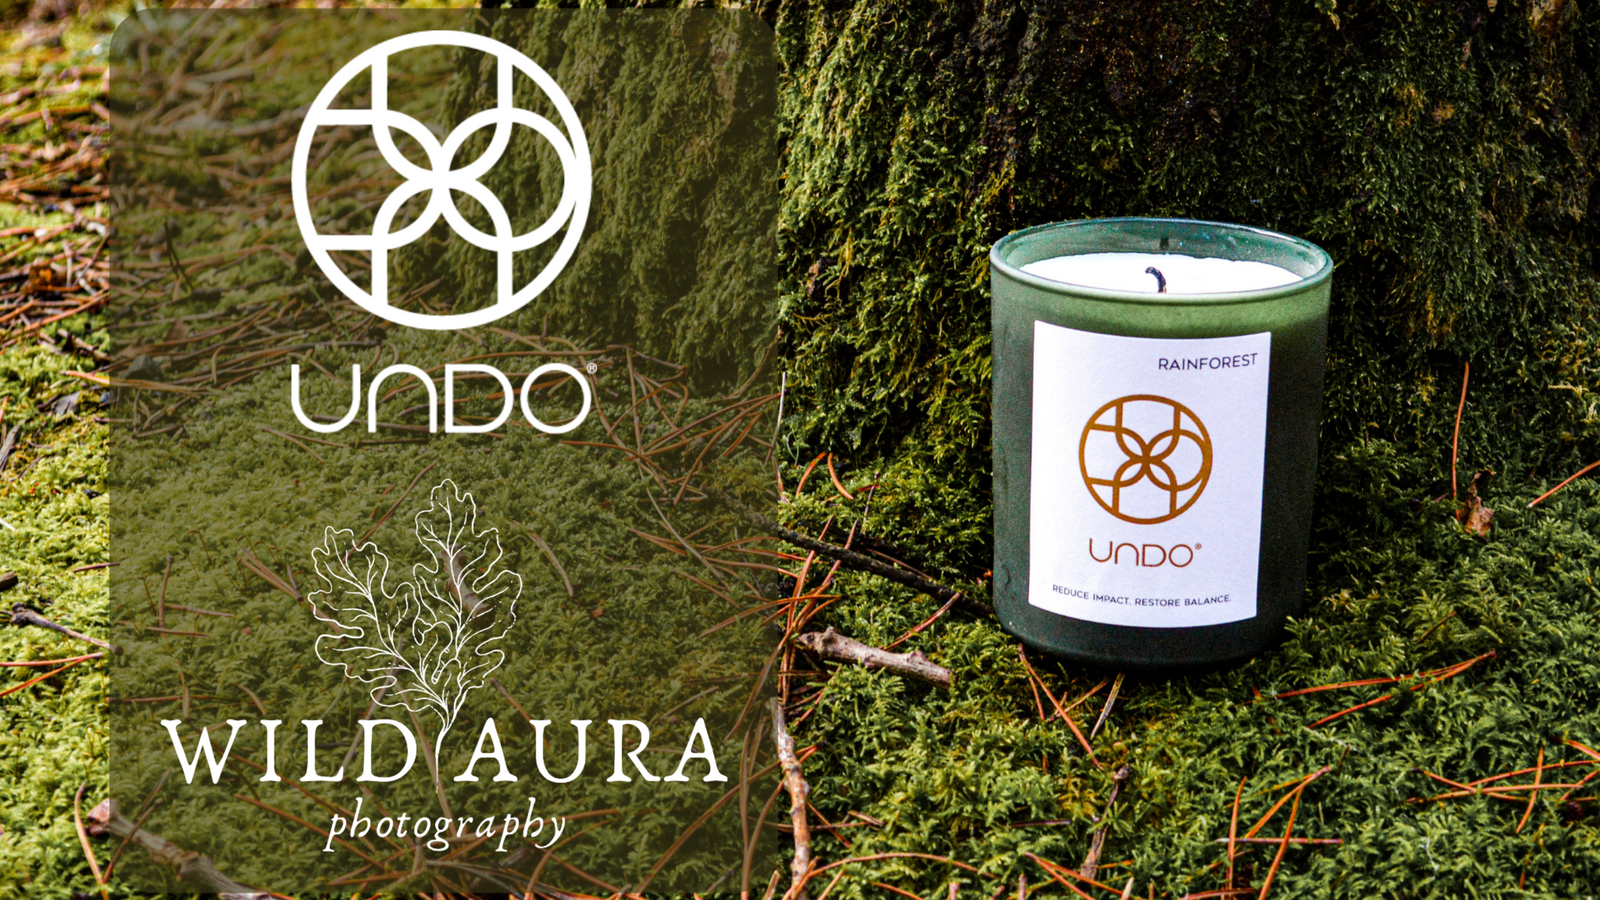 Candle on forest floor with Undo logo and Wild Aura logo